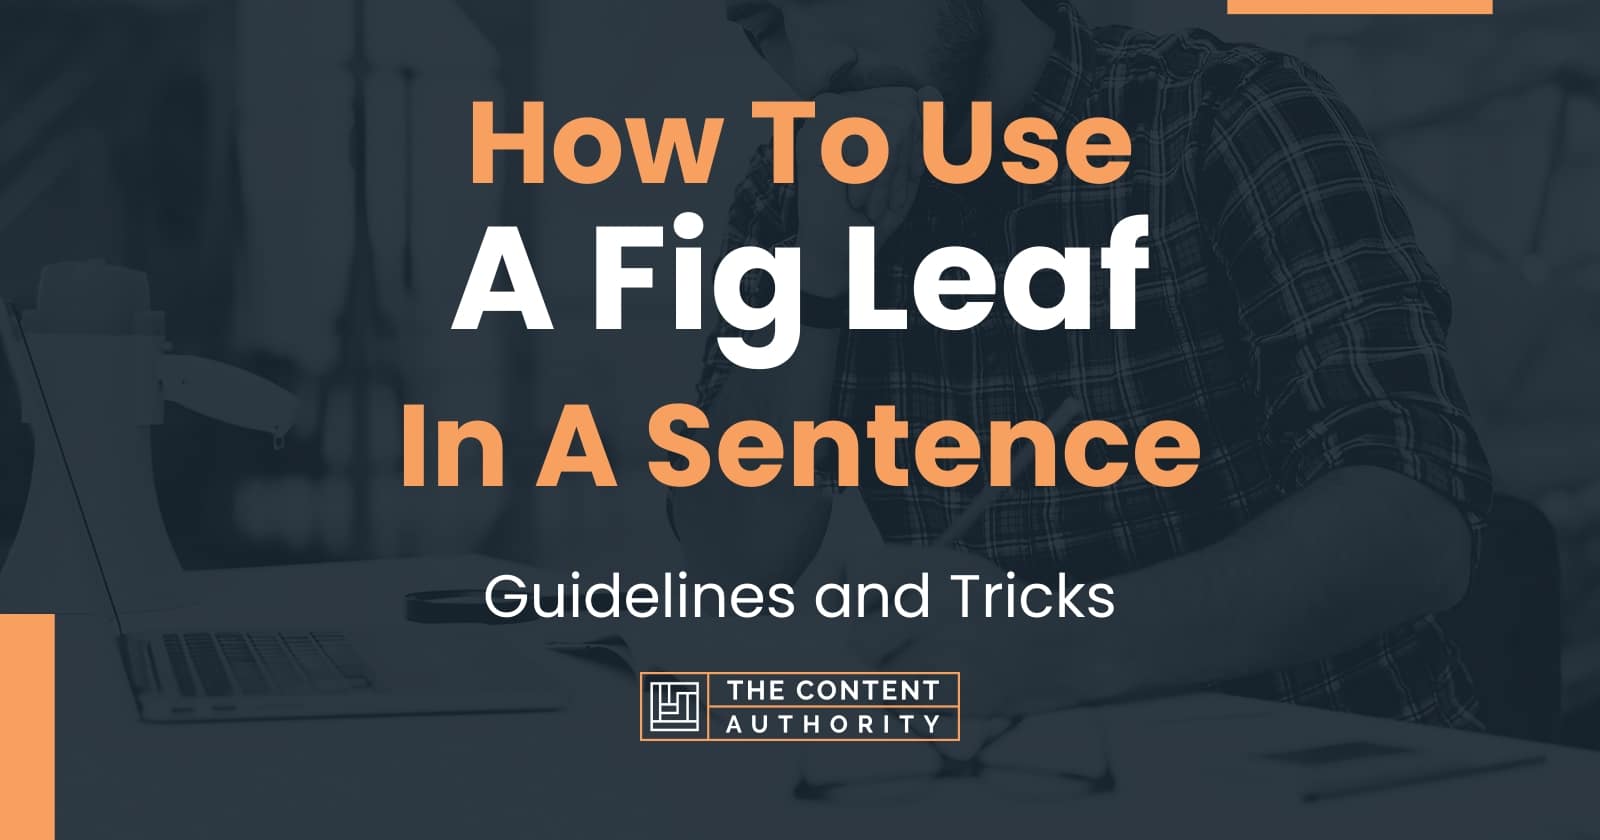 how-to-use-a-fig-leaf-in-a-sentence-guidelines-and-tricks